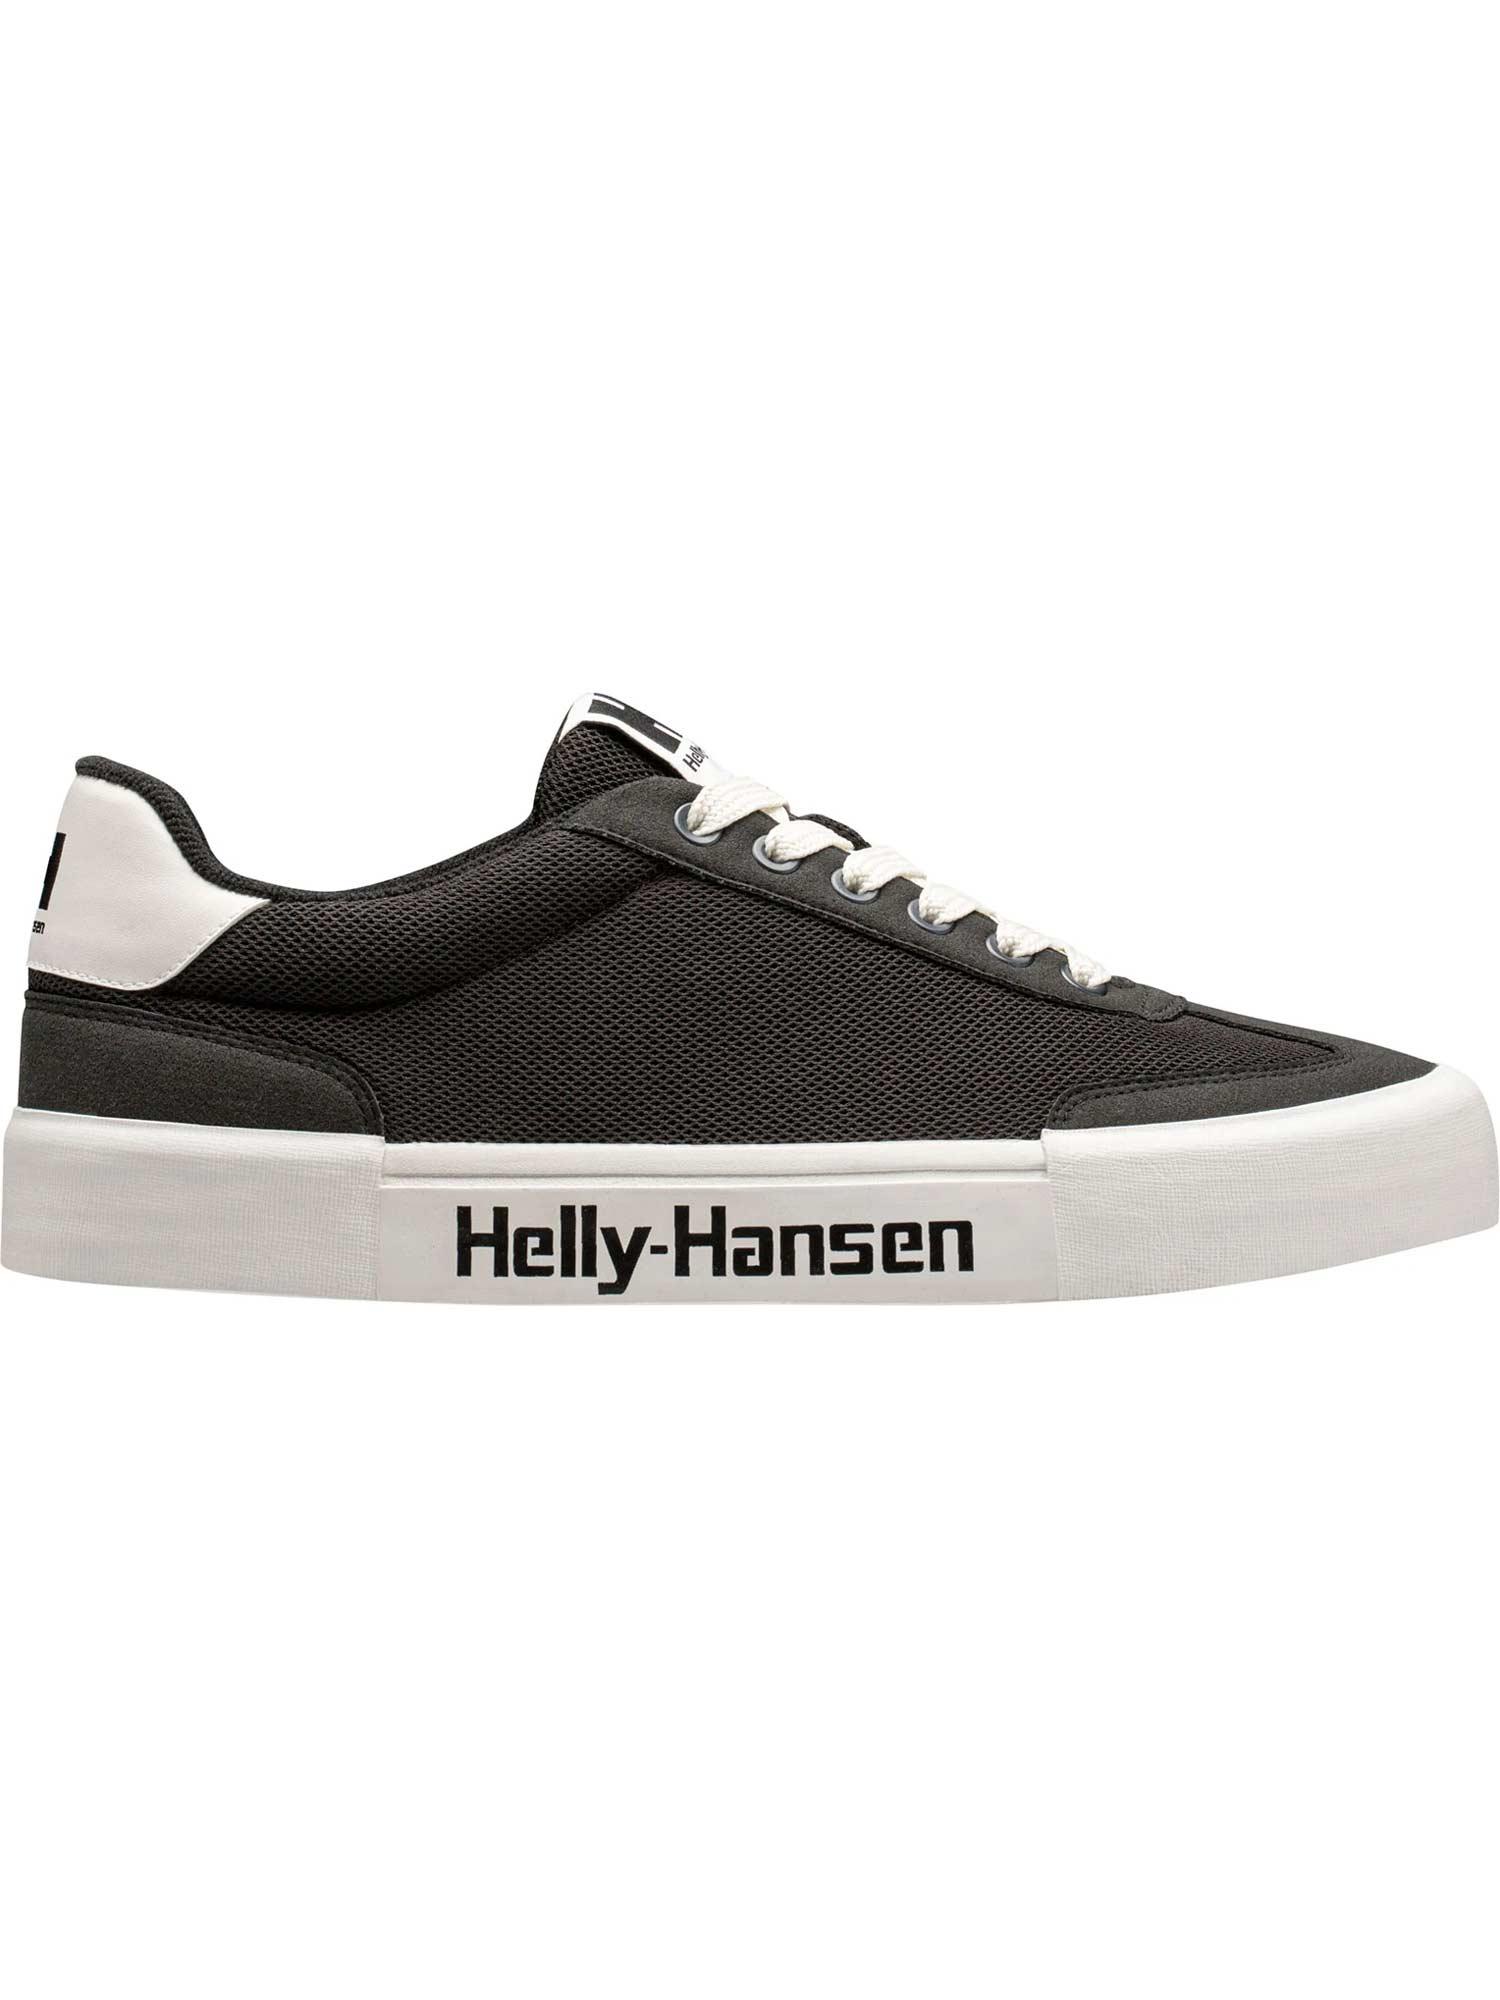 Selected image for HELLY HANSEN Muške patike crno-bele